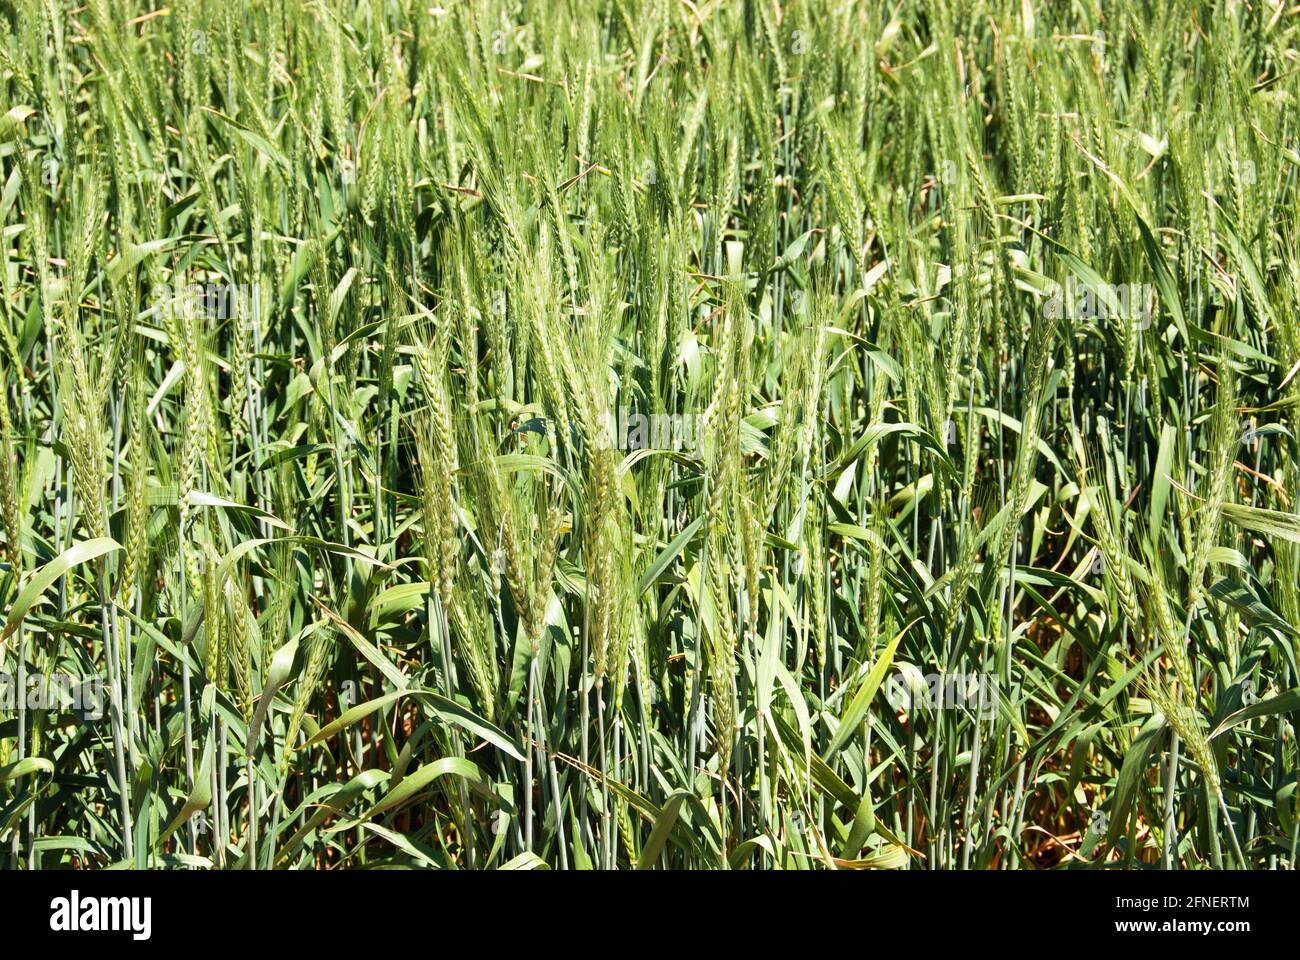 Wheat Growing on a Farm in Central New South Wales, Australia Stock Photo